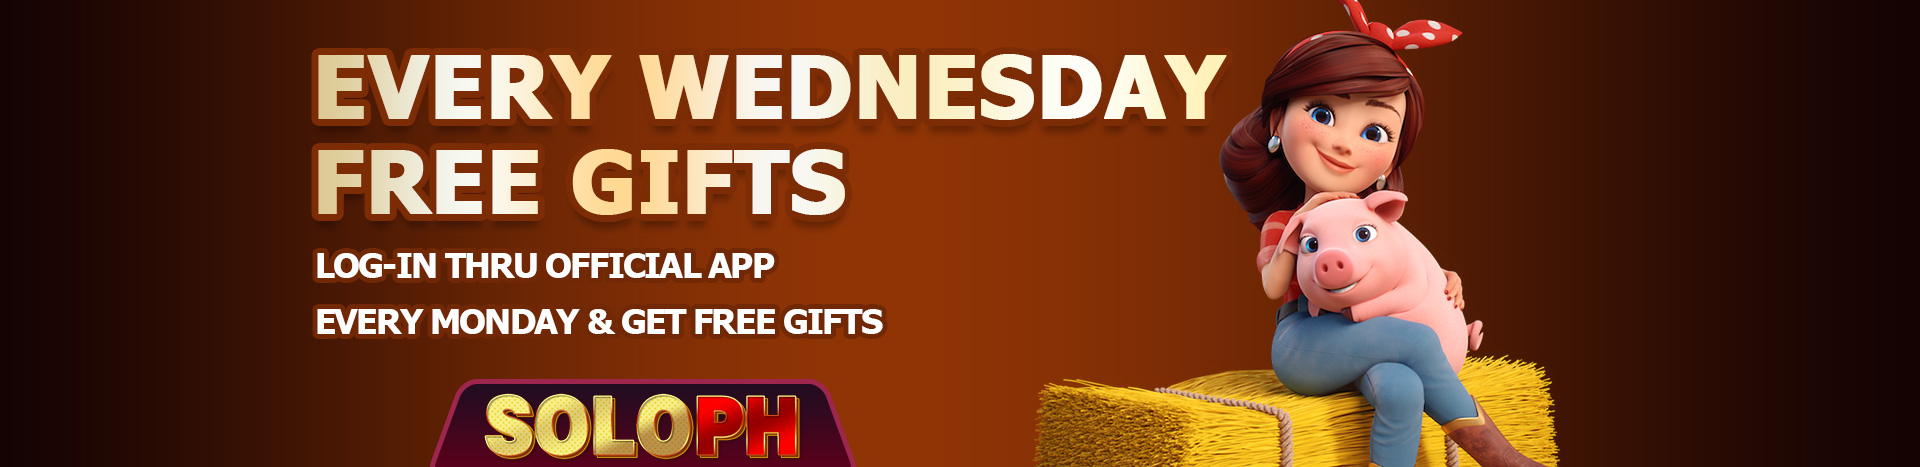 soloph every wednesday banner